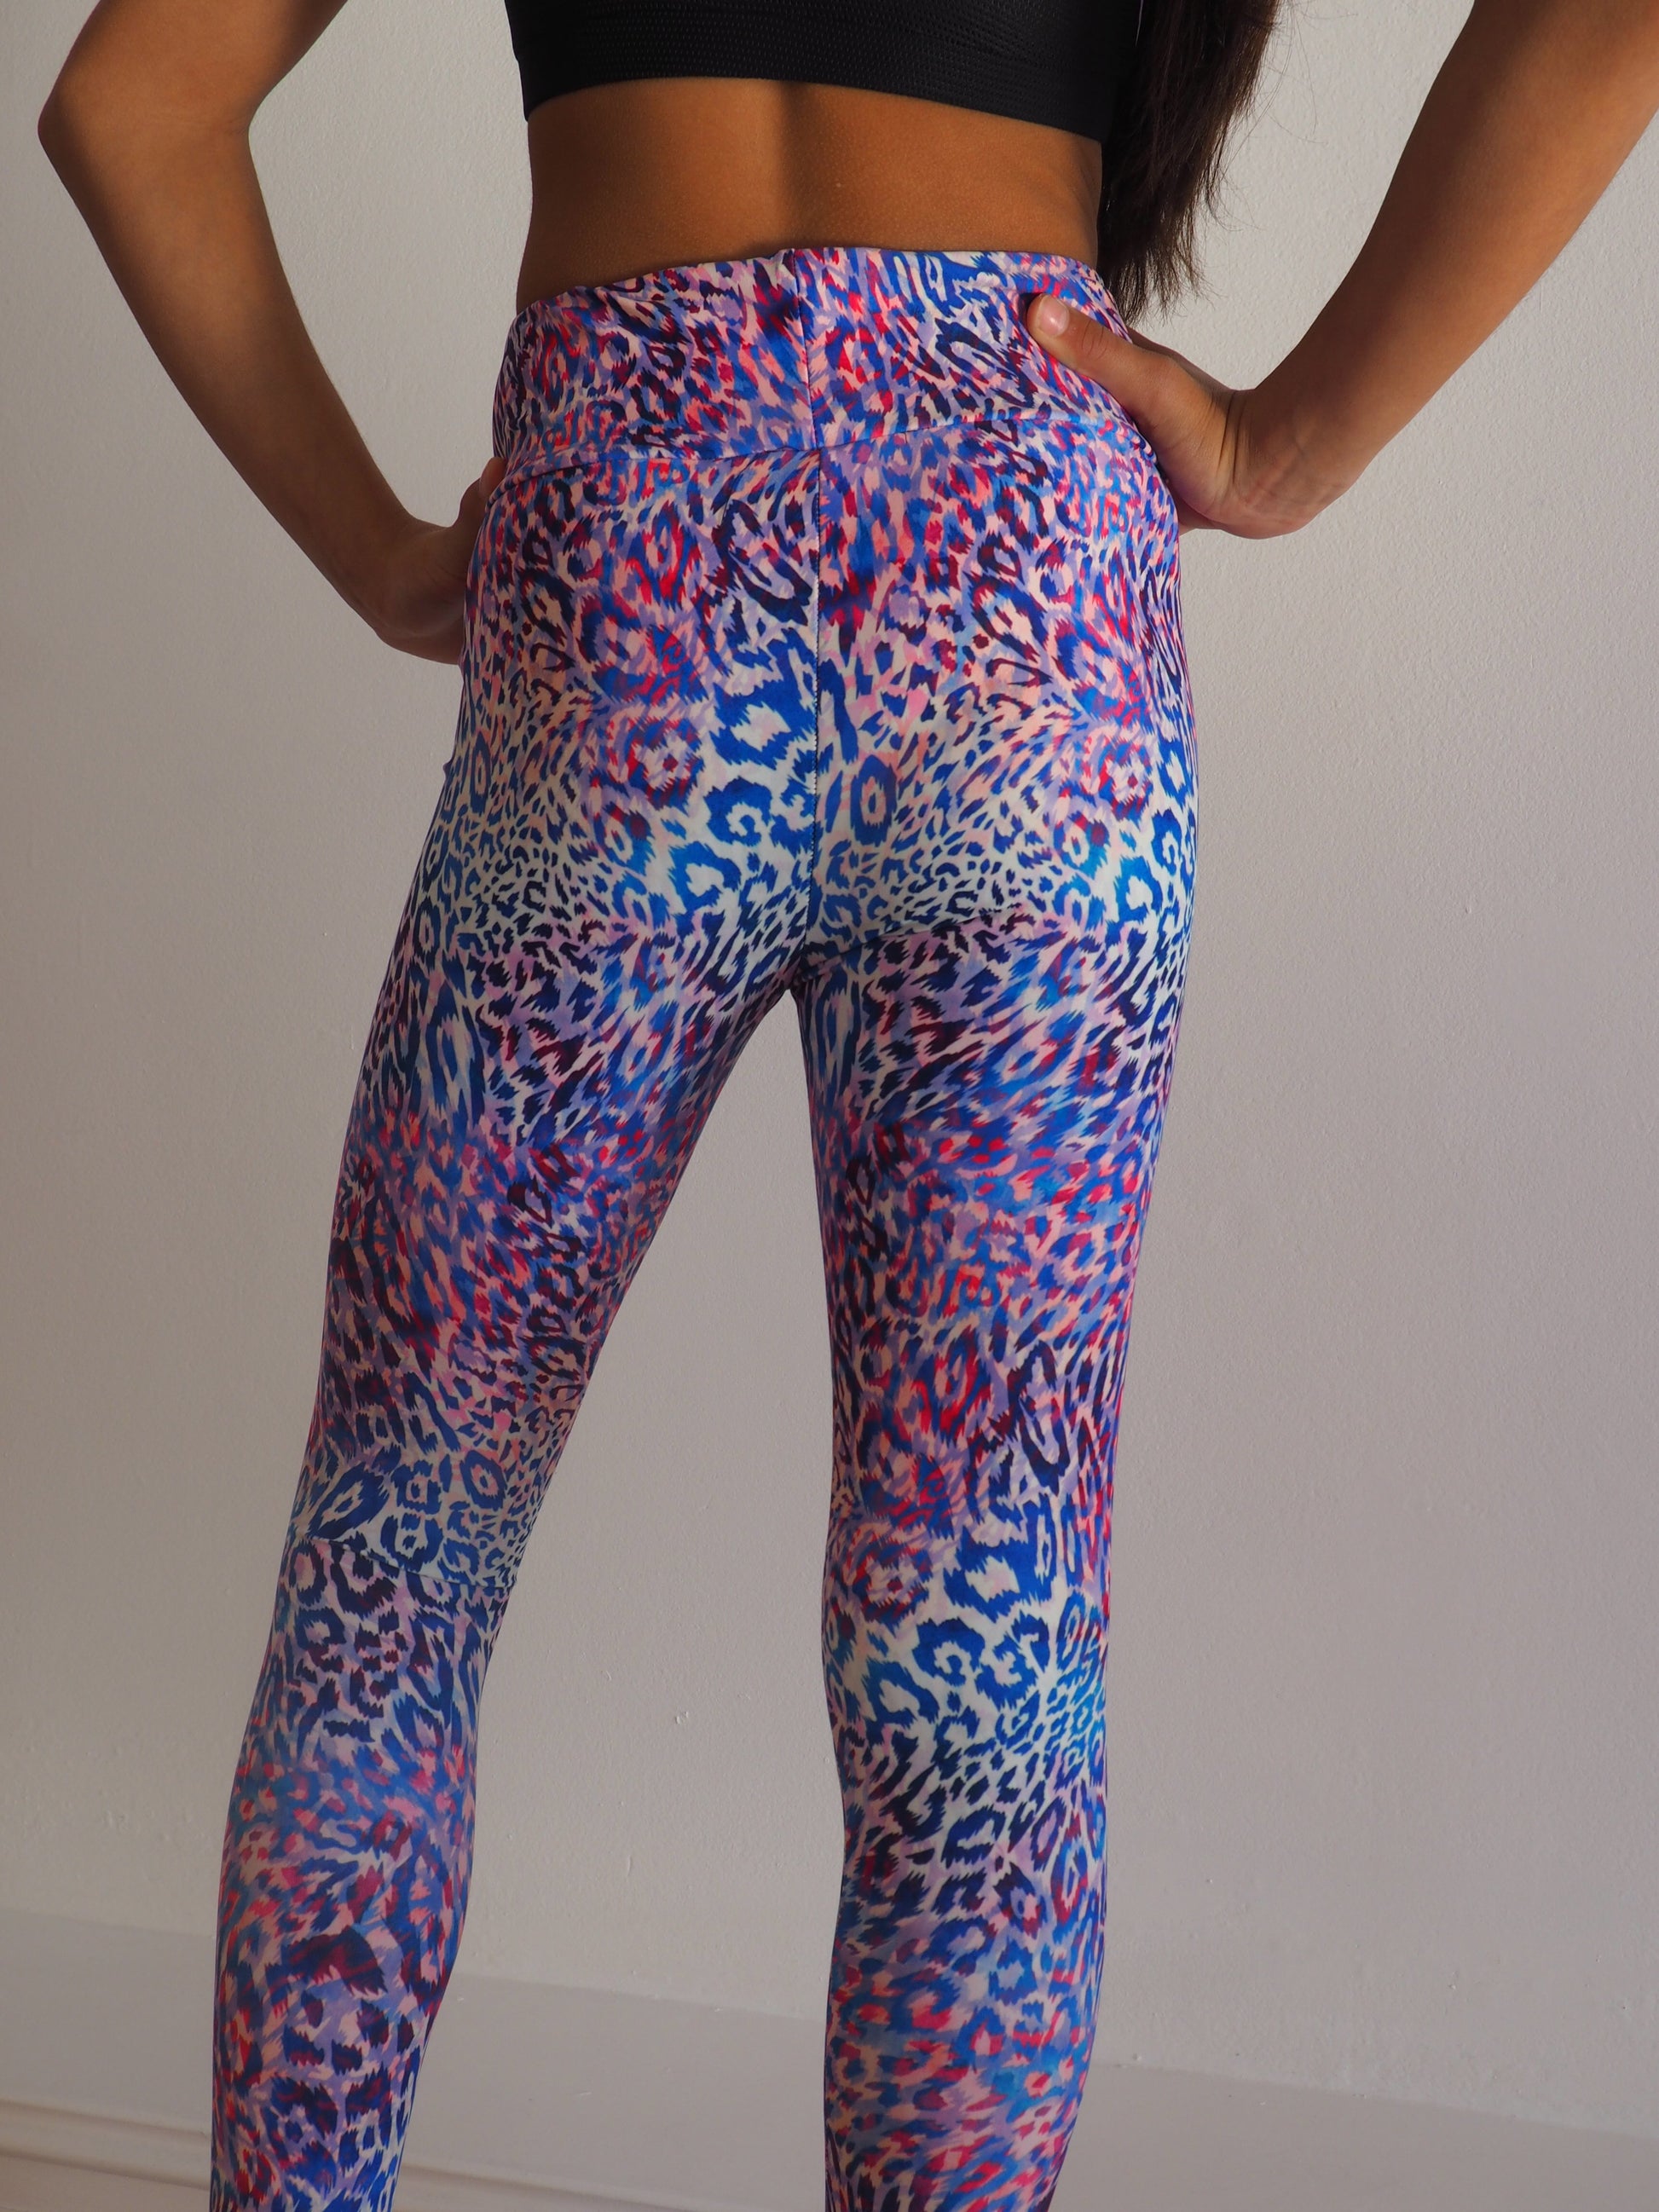 GERRY CAN // NEON LEOPARD // TWEEN COMPRESSION LEGGINGS – LIFE IN THE SUN